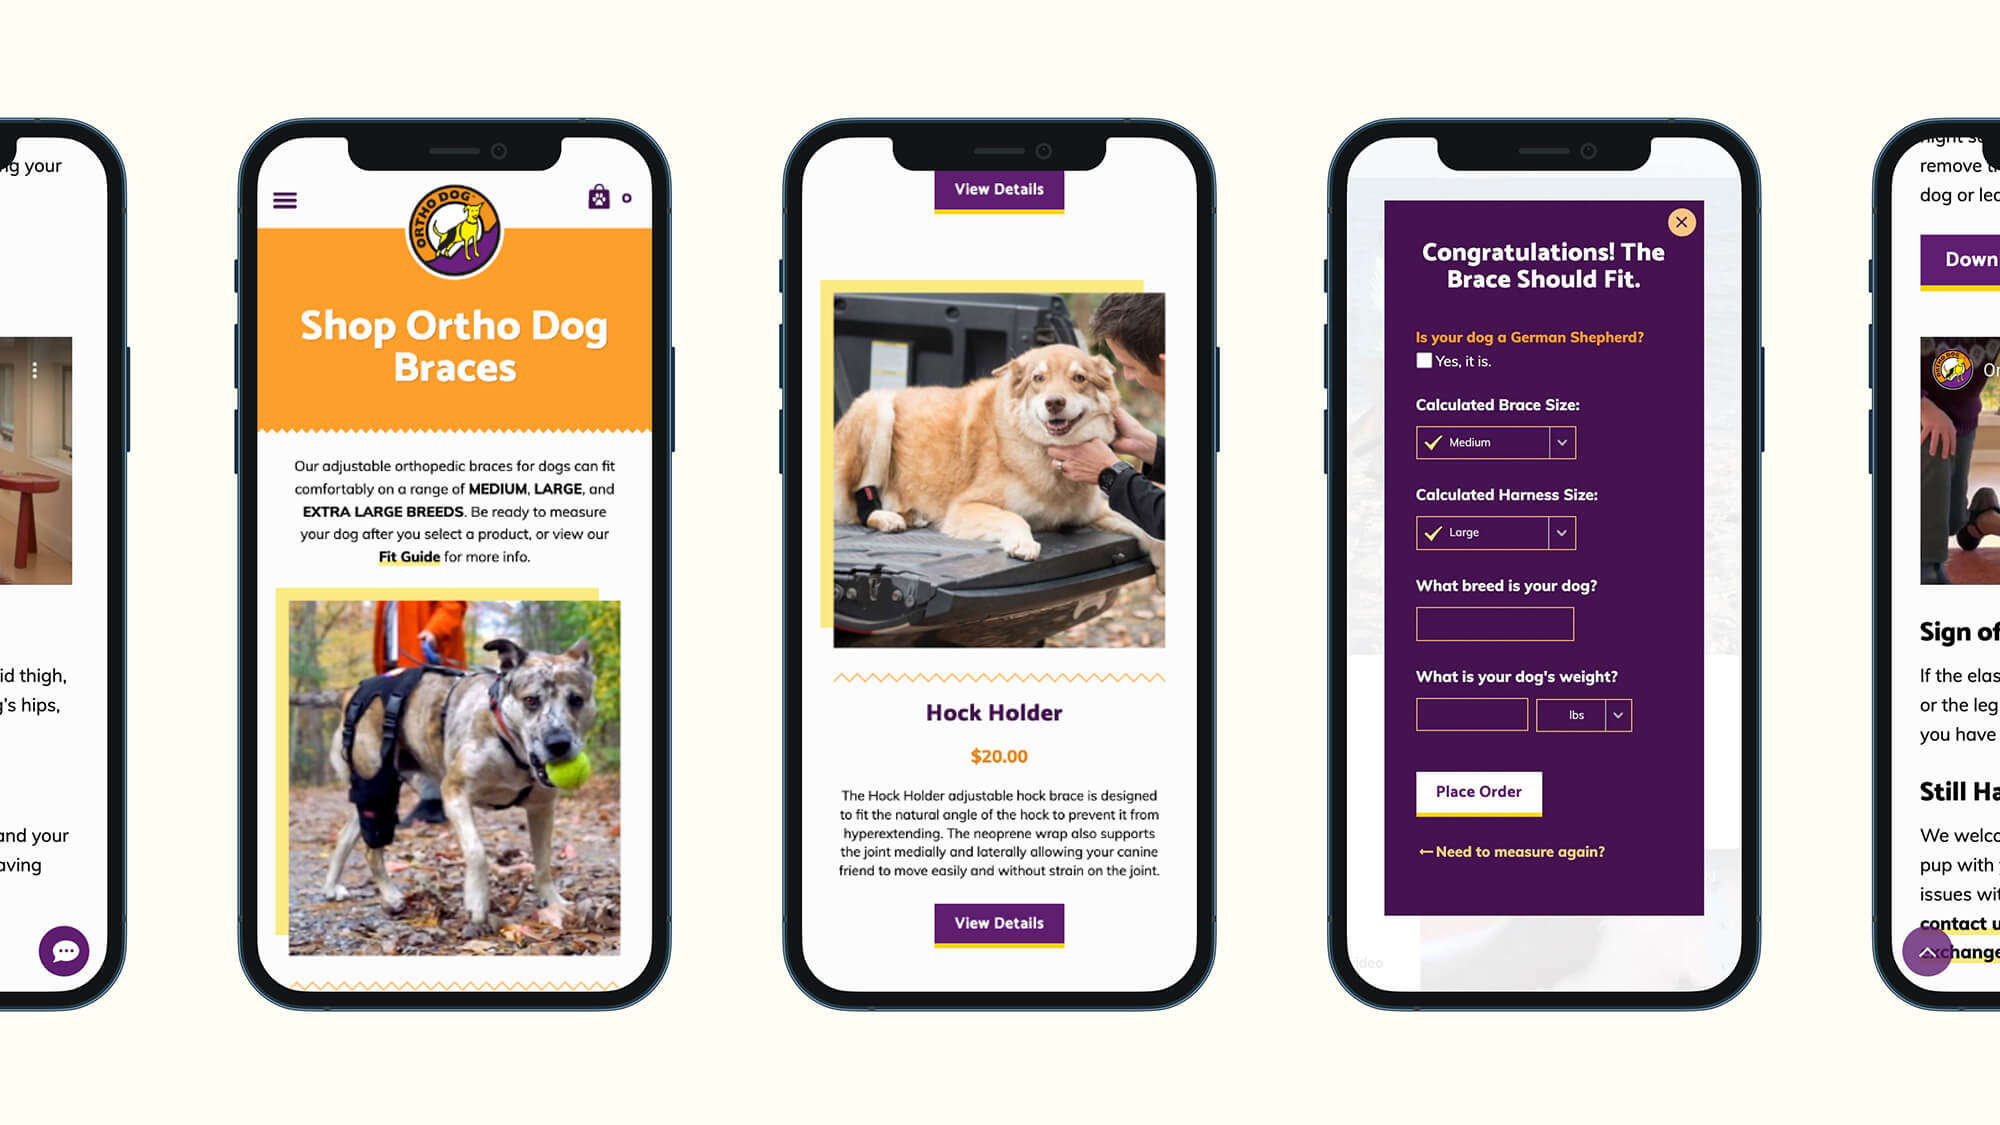 Mobile phone view of Ortho Dog website